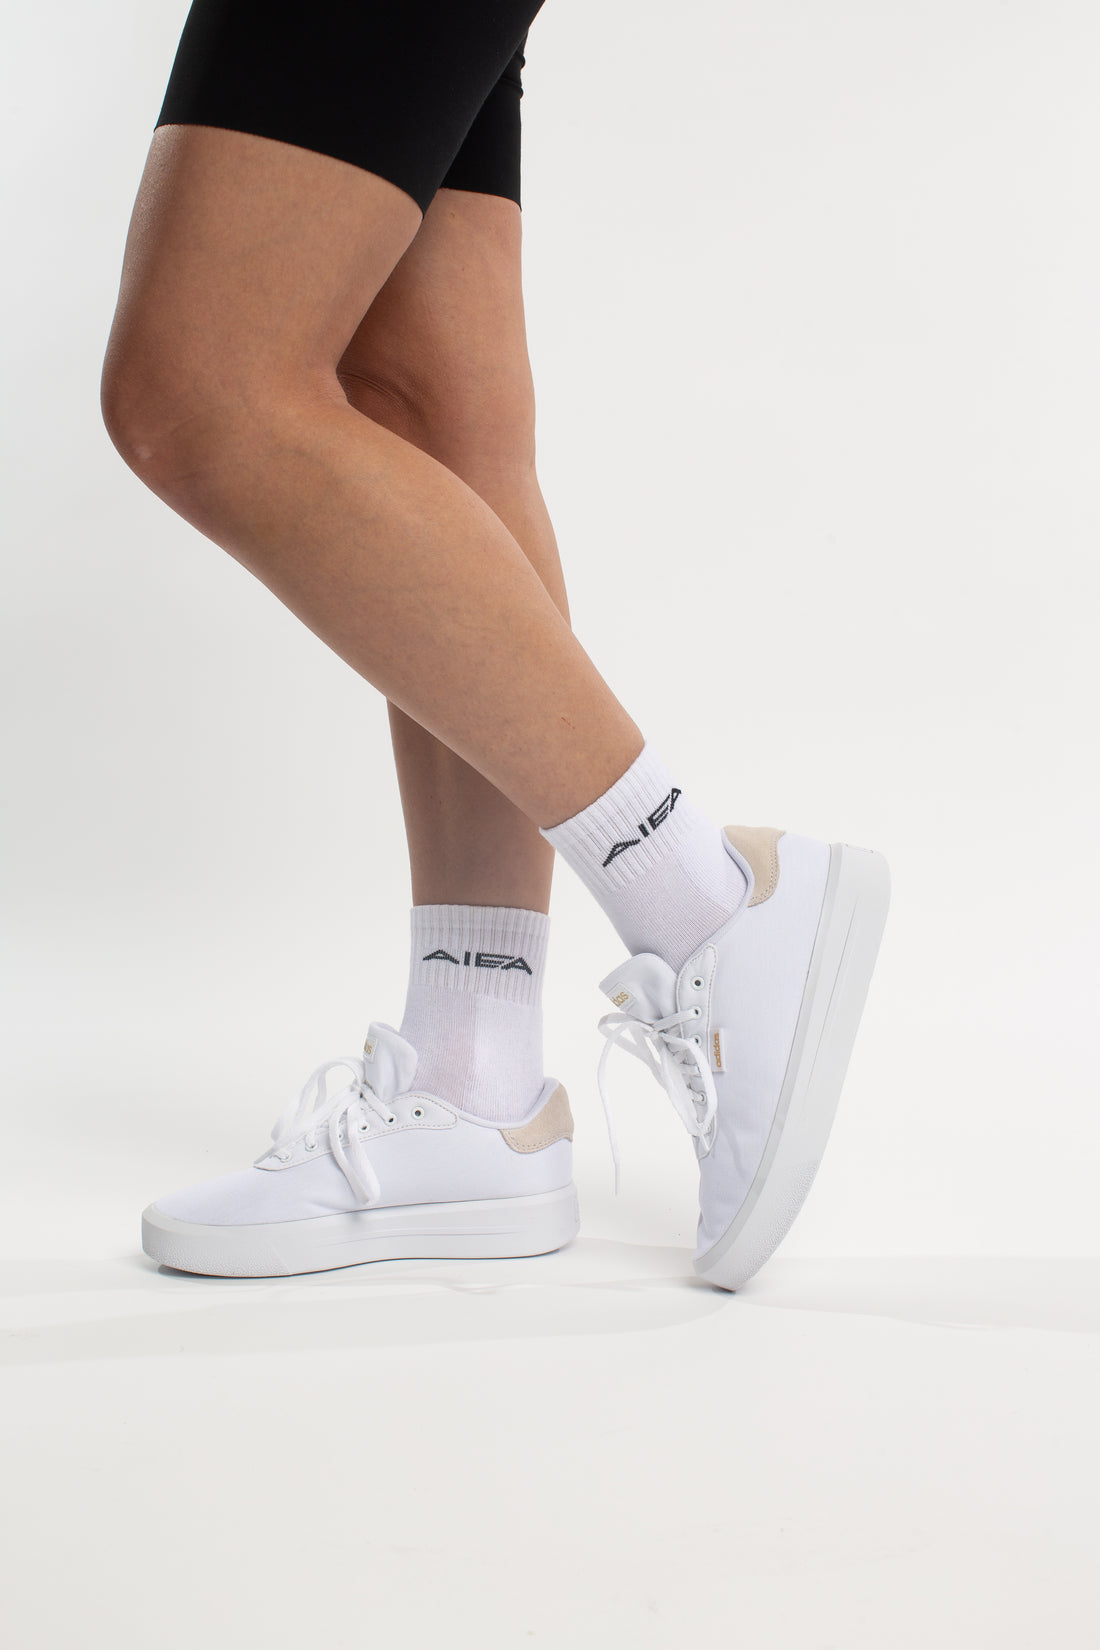 AIEA Golf athletic crew socks in white with compression support